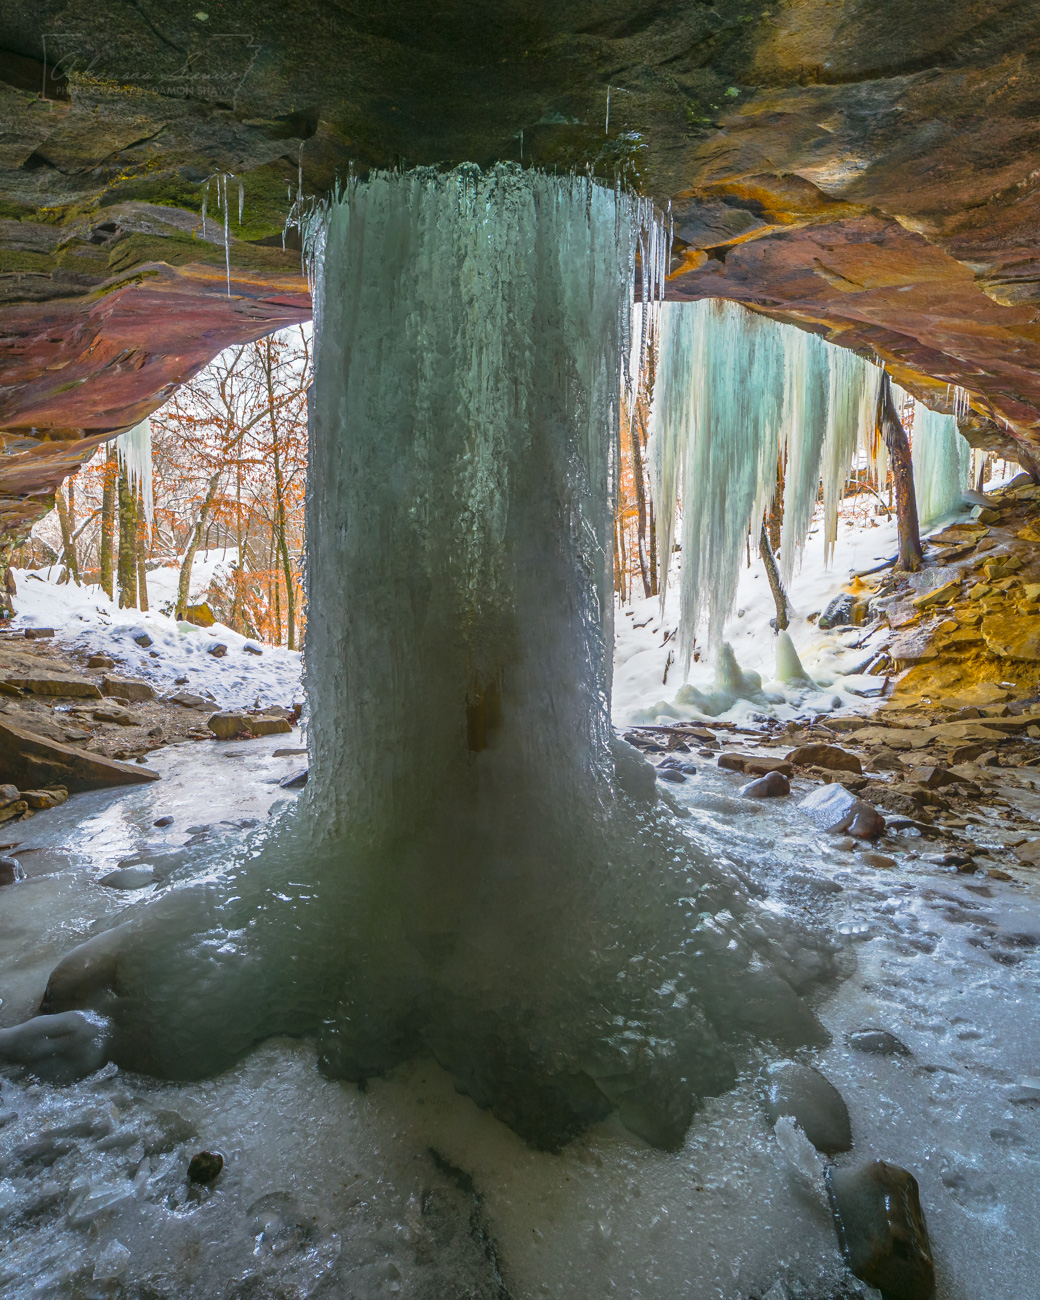 A frozen Glory Hole in the Ozark National Forest during a cold snap in February 2021.